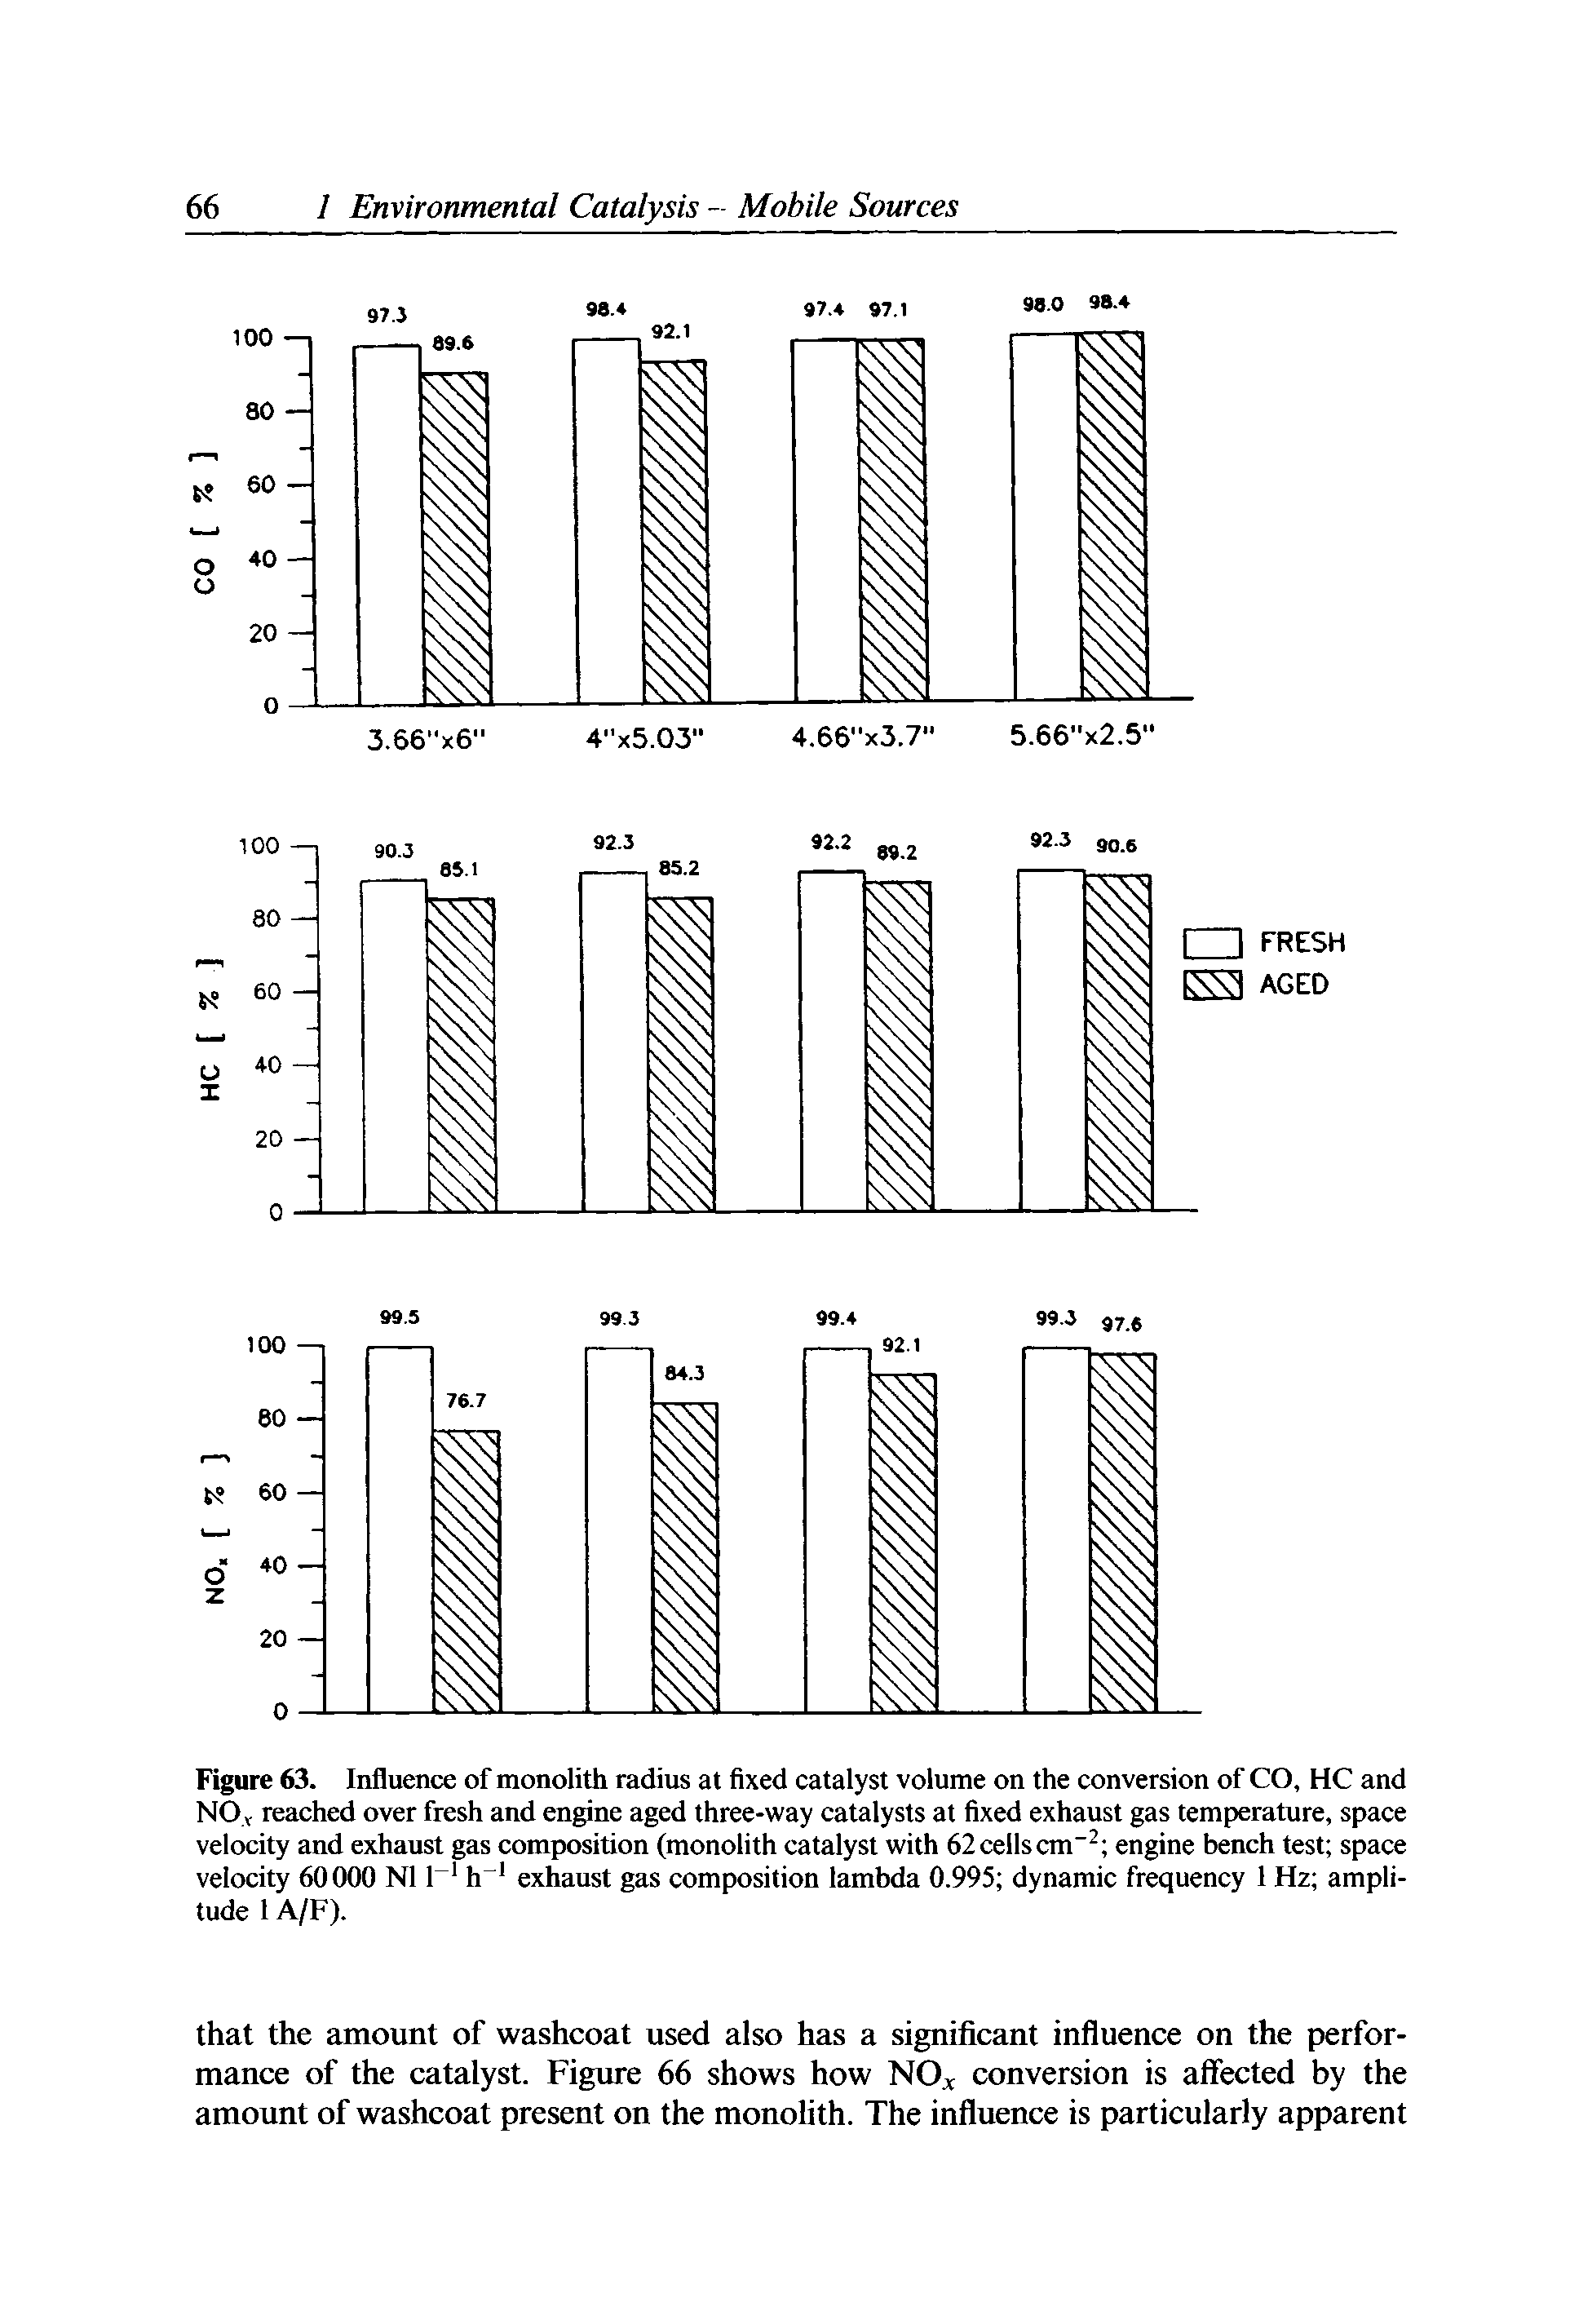 Figure 63. Influence of monolith radius at fixed catalyst volume on the conversion of CO, HC and NO.v reached over fresh and engine aged three-way catalysts at fixed exhaust gas temperature, space velocity and exhaust gas composition (monolith catalyst with 62cellscm" engine bench test space velocity 60000 N11 h exhaust gas composition lambda 0.995 dynamic frequency 1 Hz amplitude 1A/F).